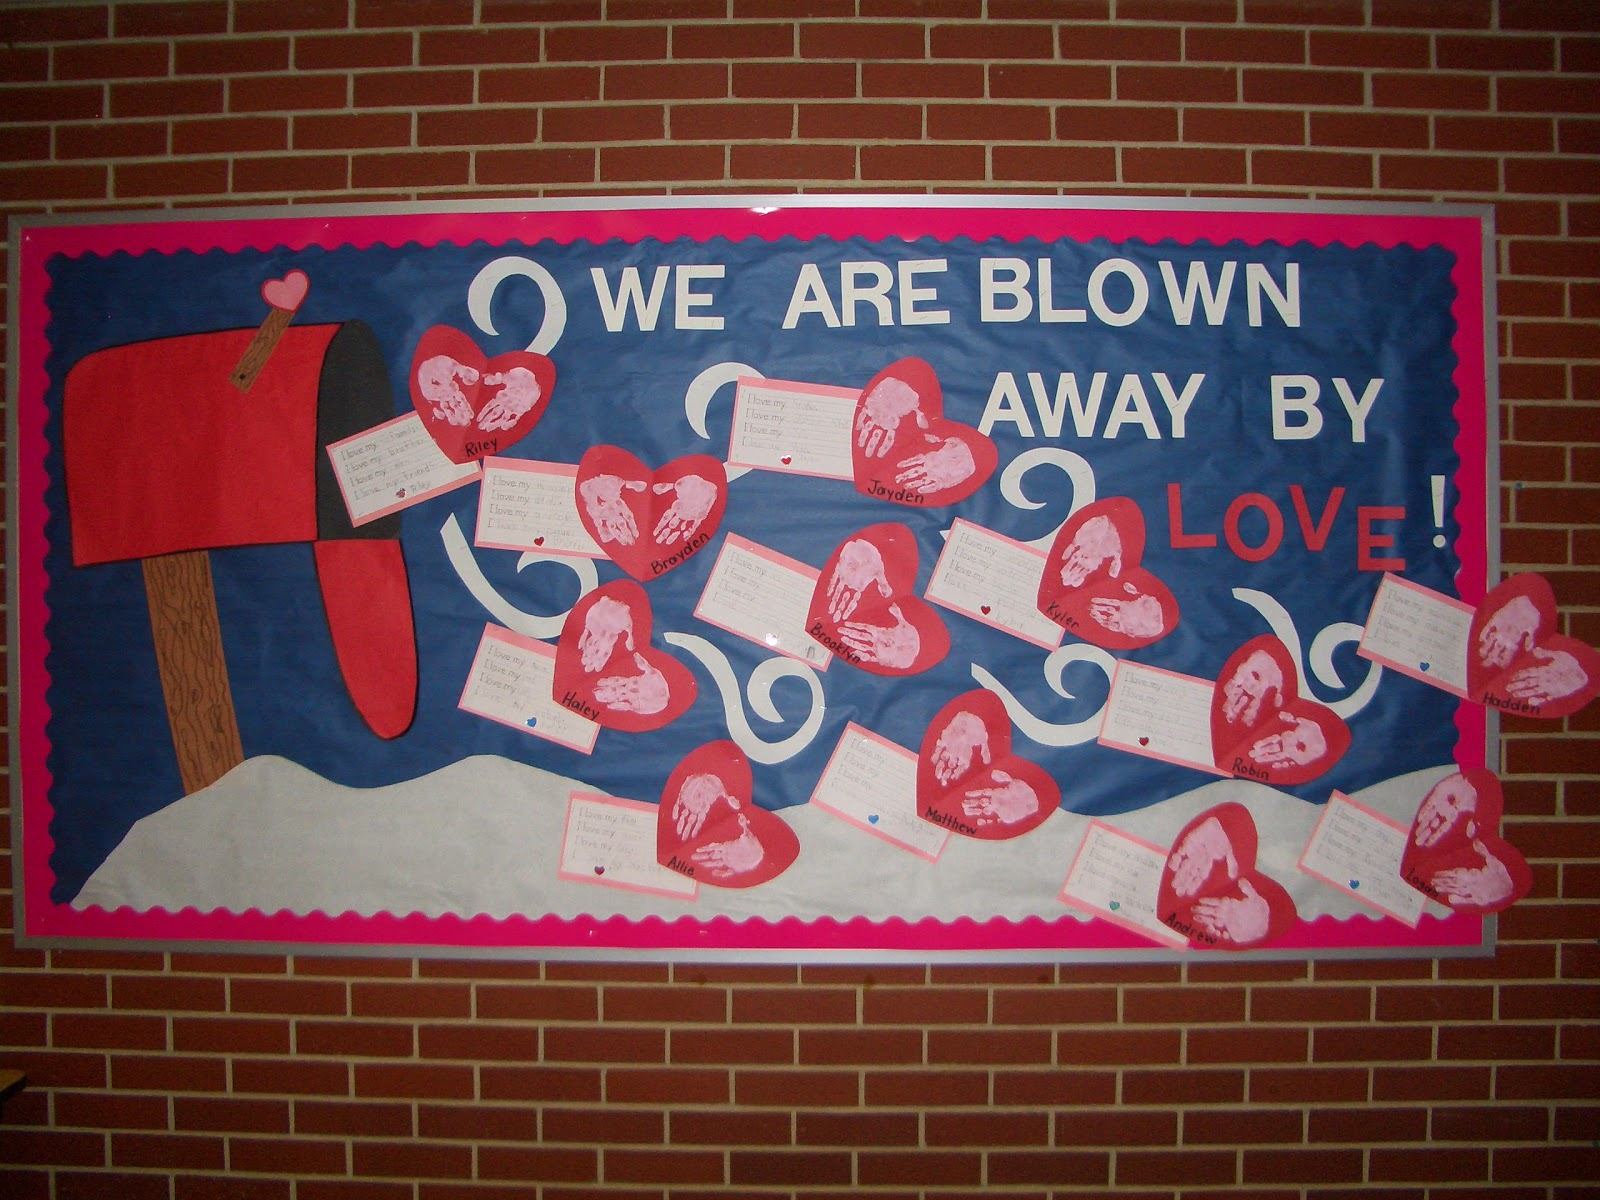 A View From A Different Angle: Our February Bulletin Board